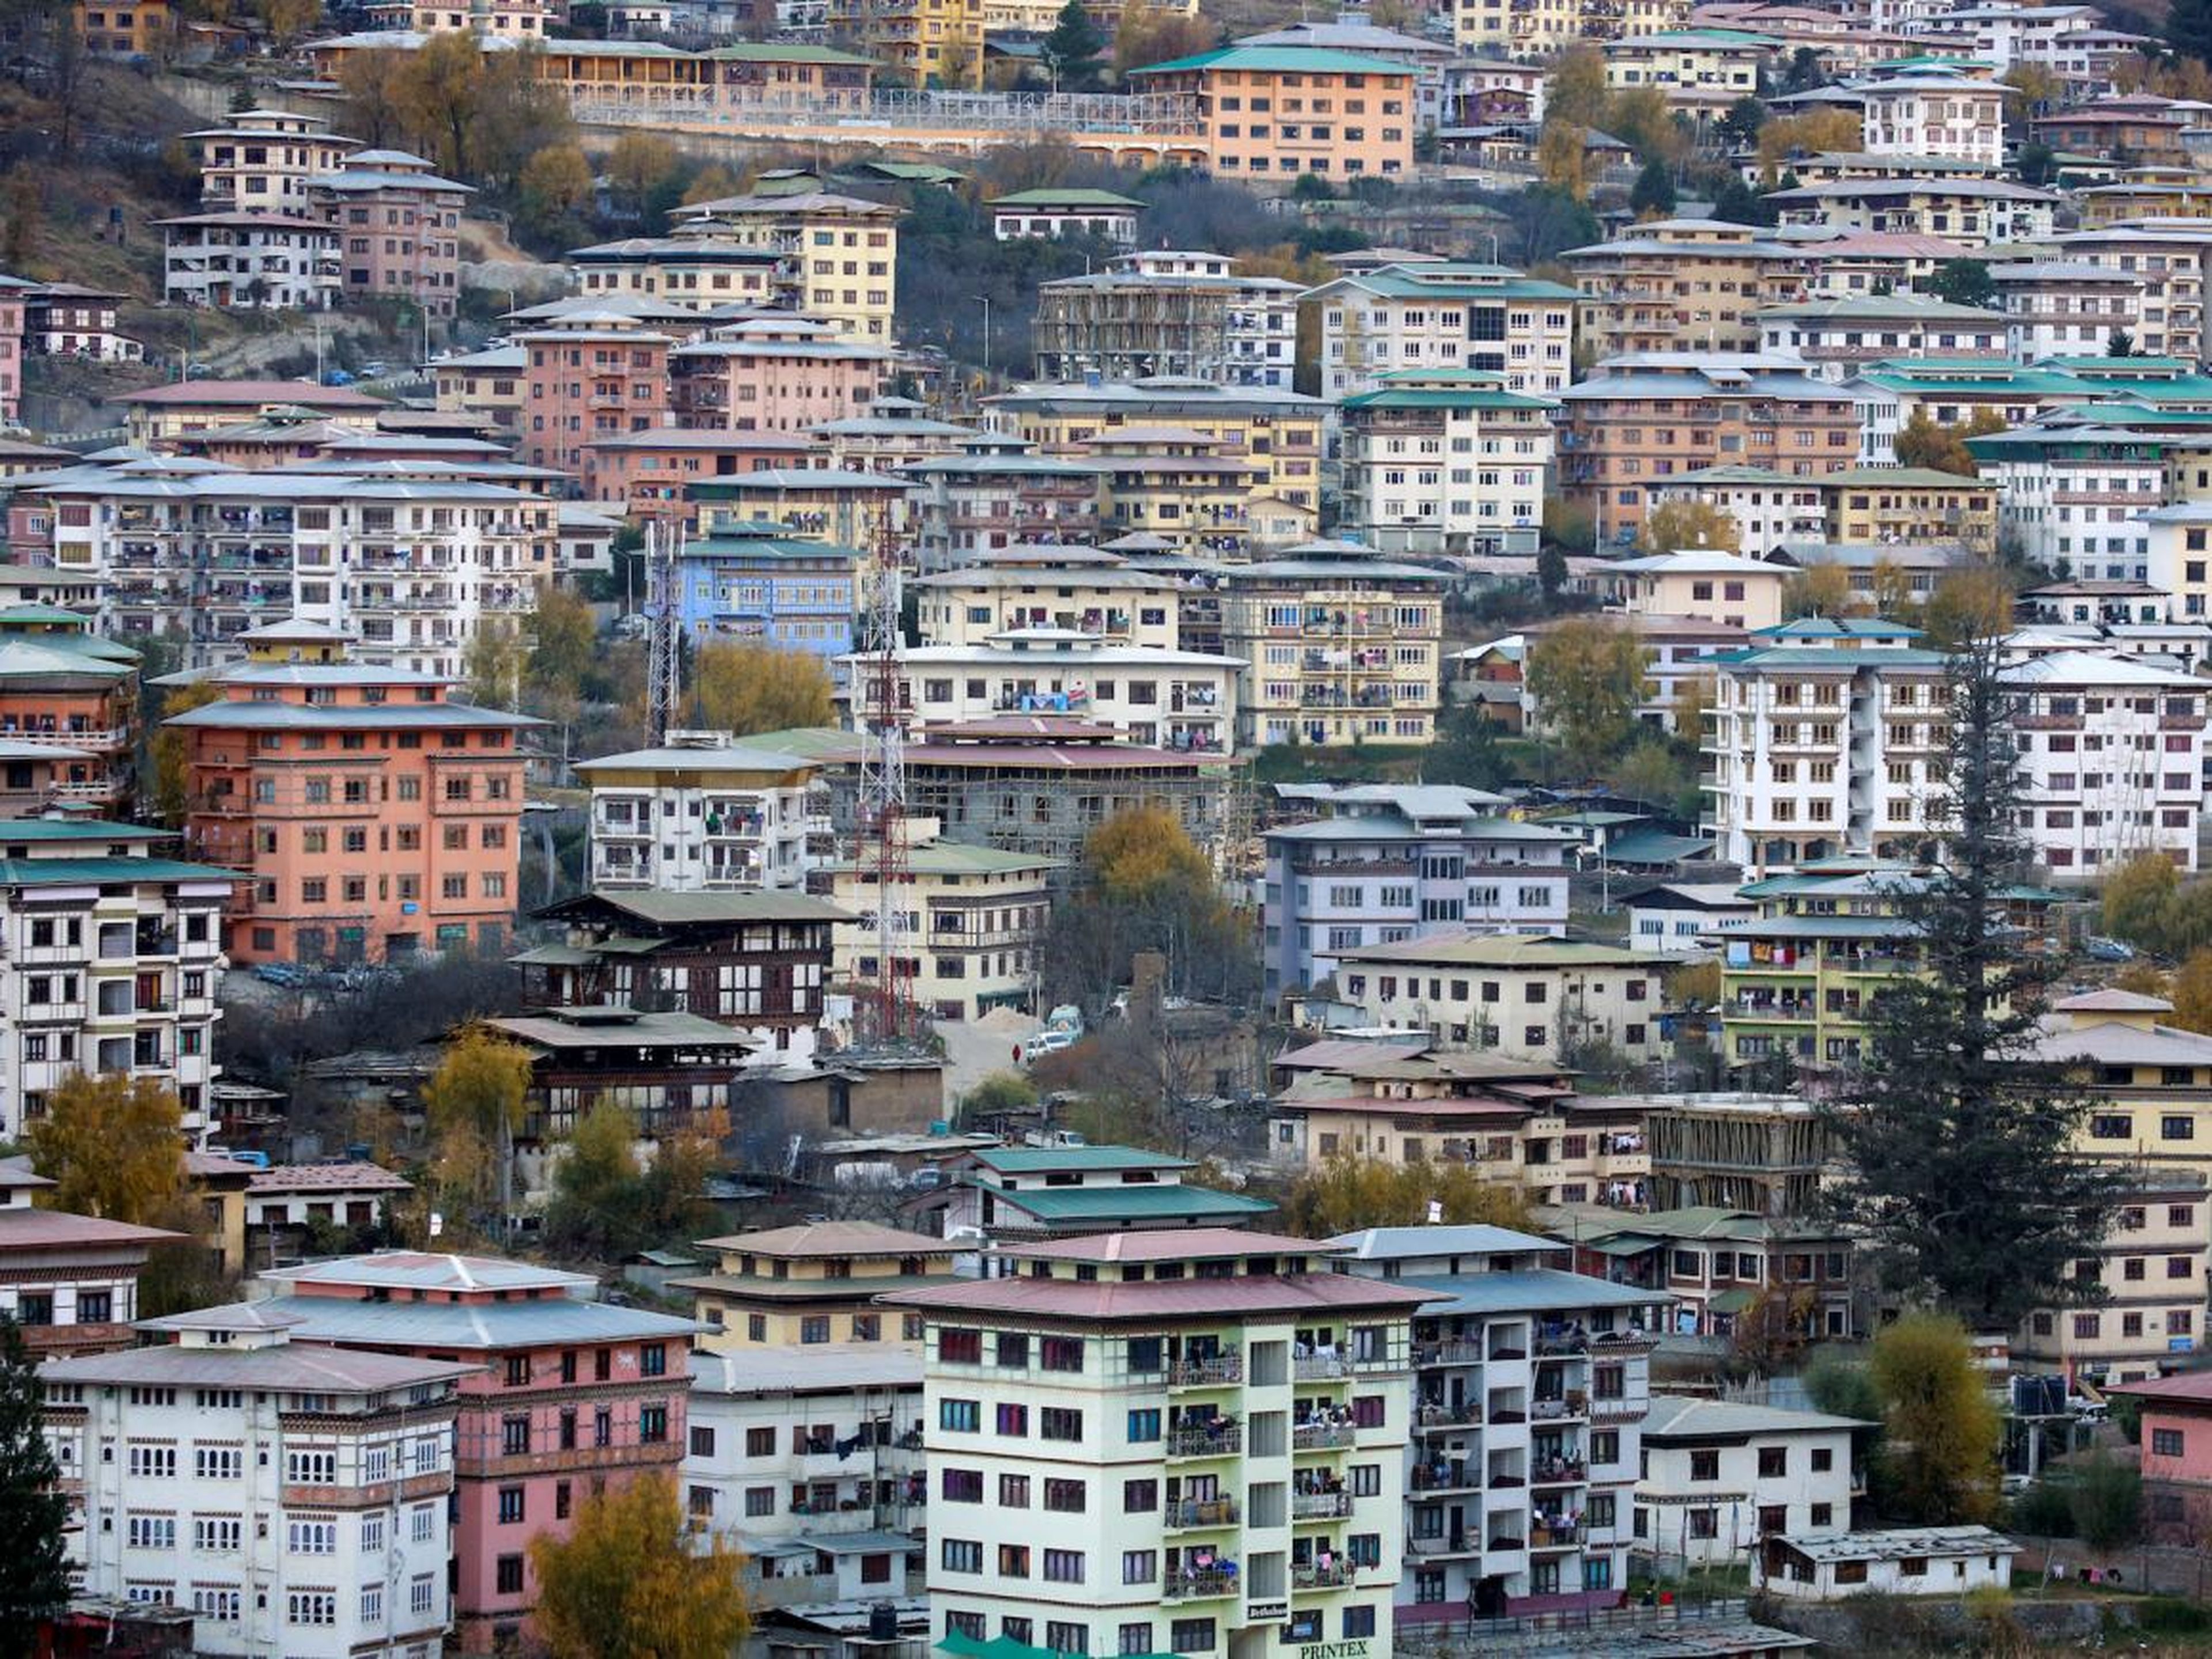 As progress marches on, Bhutan must learn to adapt with these modern challenges.